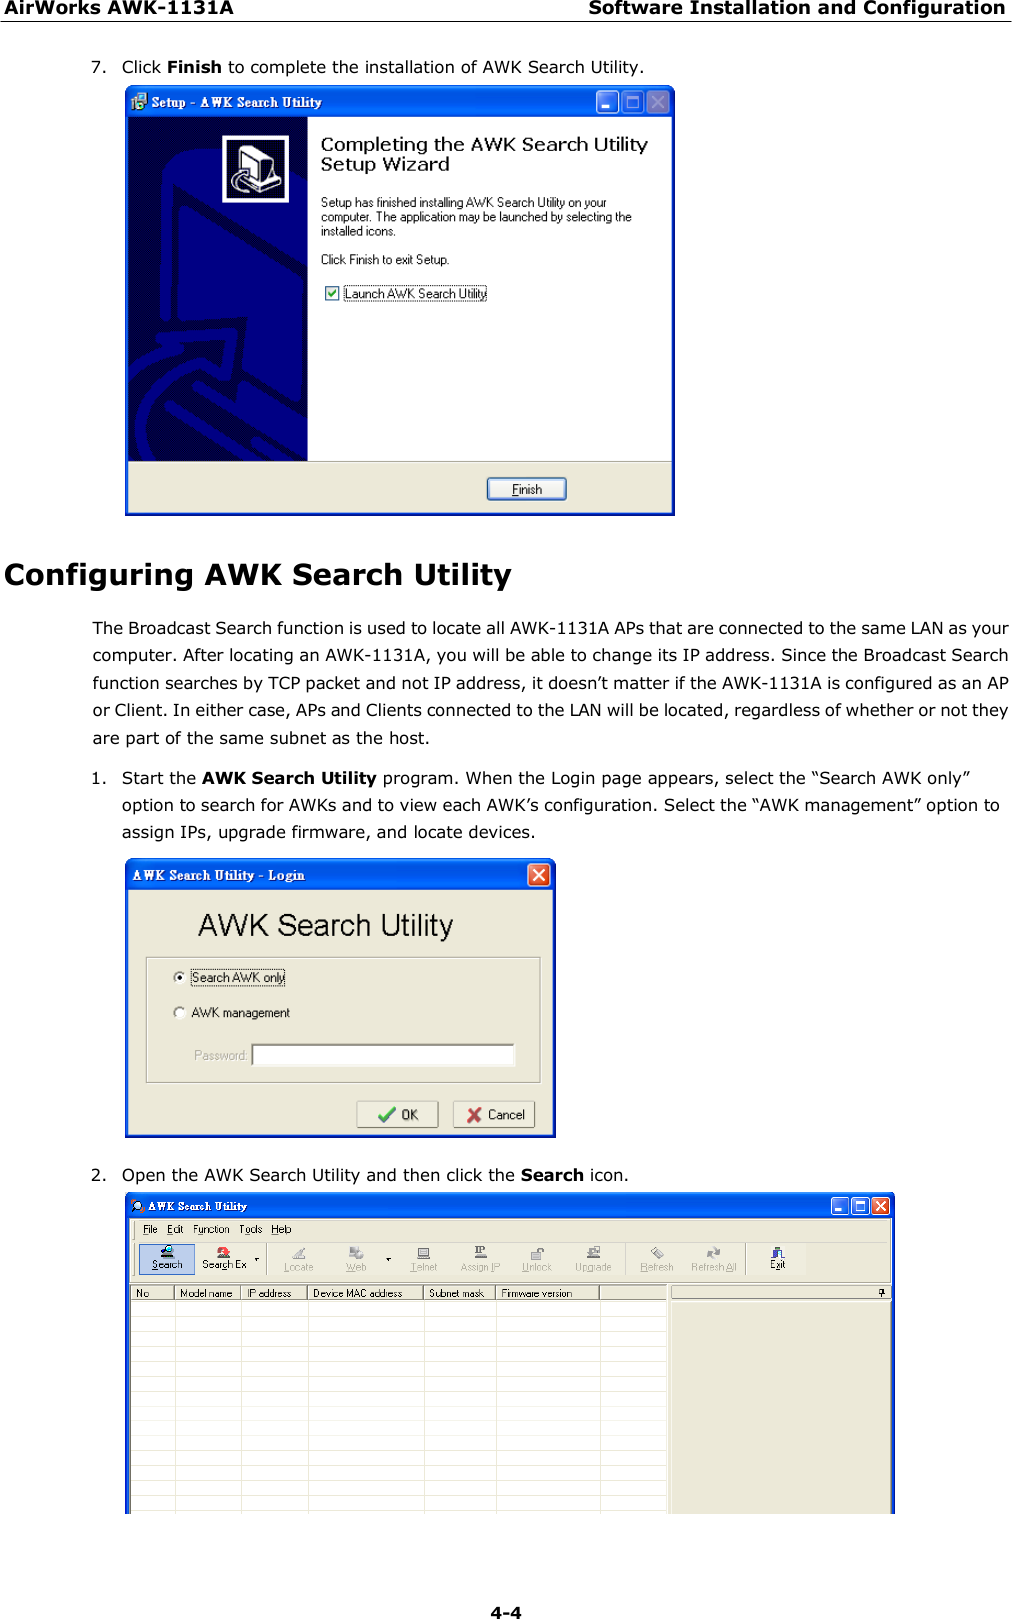 AirWorks AWK-1131A Software Installation and Configuration 4-4    7. Click Finish to complete the installation of AWK Search Utility.    Configuring AWK Search Utility  The Broadcast Search function is used to locate all AWK-1131A APs that are connected to the same LAN as your computer. After locating an AWK-1131A, you will be able to change its IP address. Since the Broadcast Search function searches by TCP packet and not IP address, it doesn’t matter if the AWK-1131A is configured as an AP or Client. In either case, APs and Clients connected to the LAN will be located, regardless of whether or not they are part of the same subnet as the host.  1. Start the AWK Search Utility program. When the Login page appears, select the “Search AWK only” option to search for AWKs and to view each AWK’s configuration. Select the “AWK management” option to assign IPs, upgrade firmware, and locate devices.   2. Open the AWK Search Utility and then click the Search icon.  